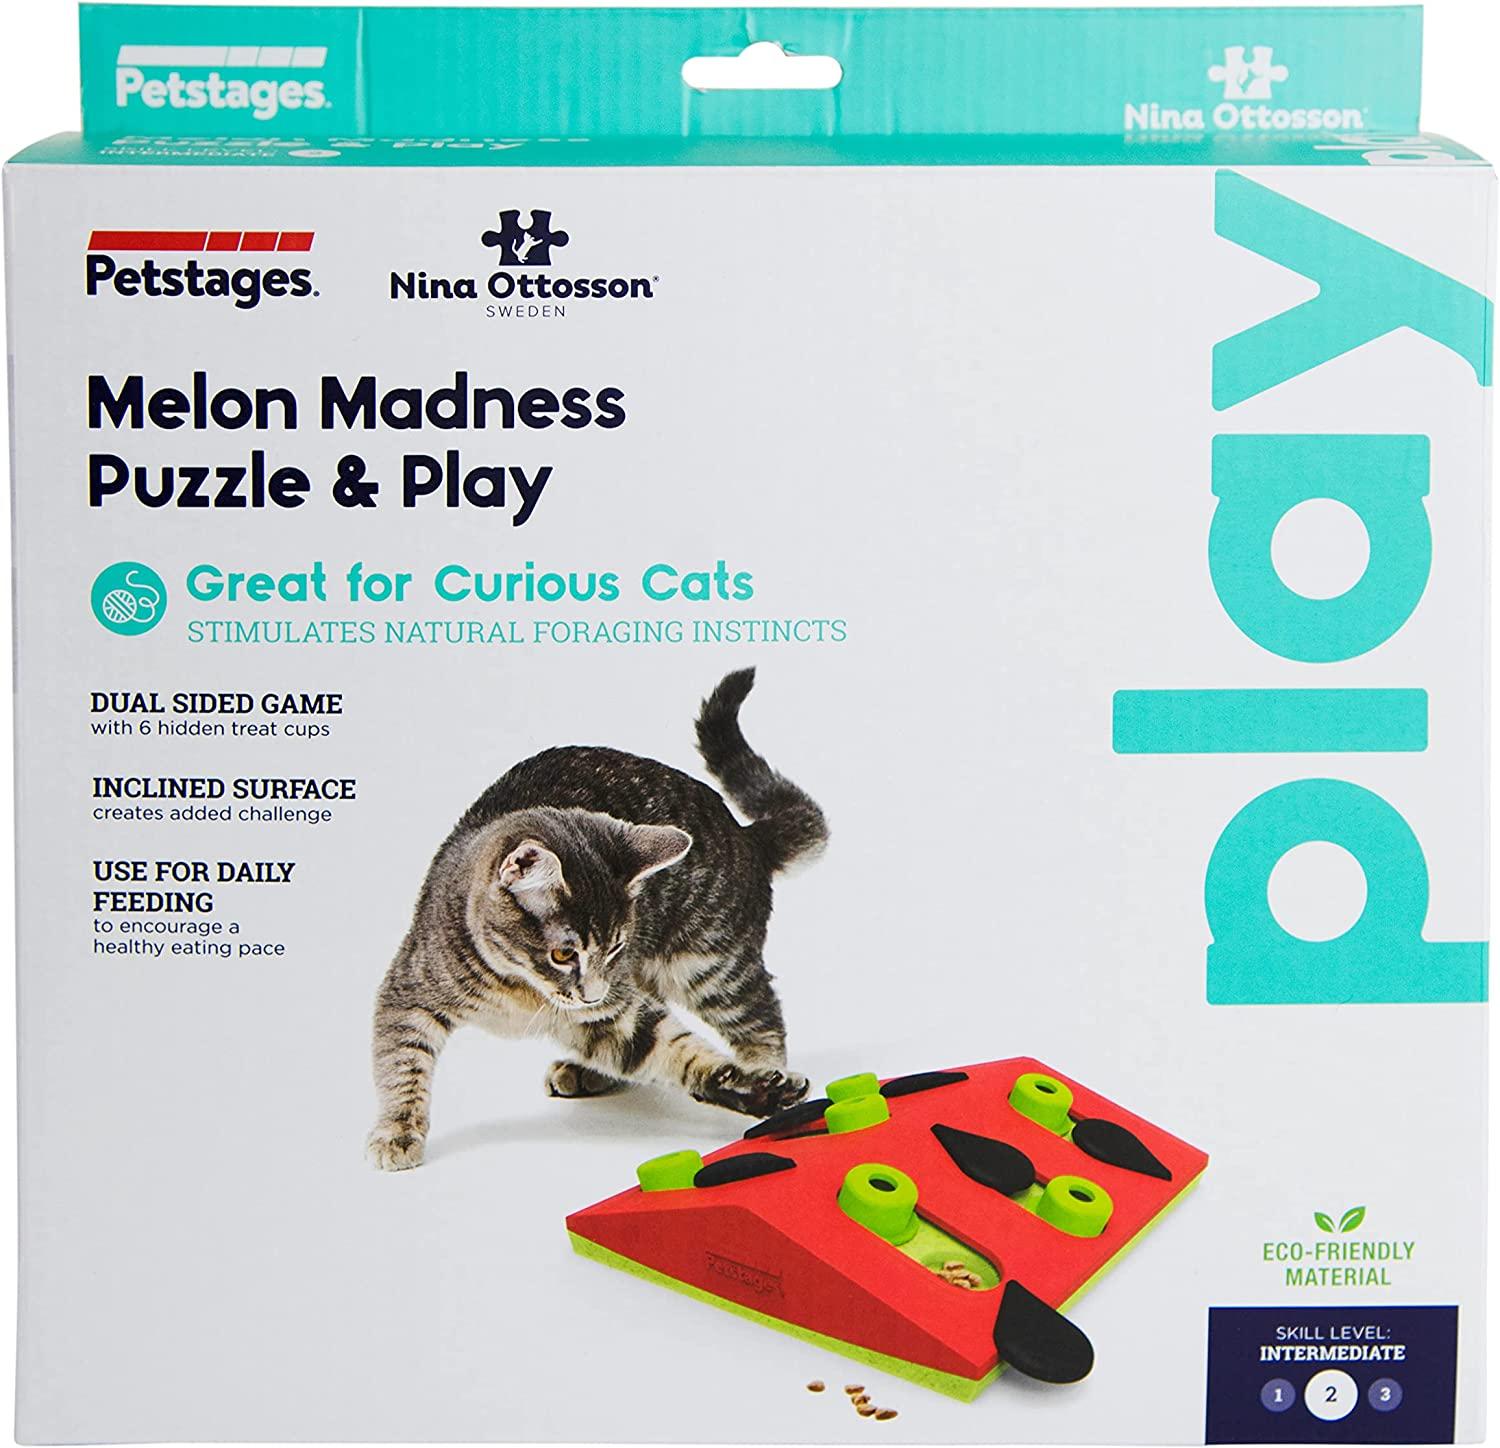 Nina Ottosson Puzzle & Play - Buggin' Out, Order